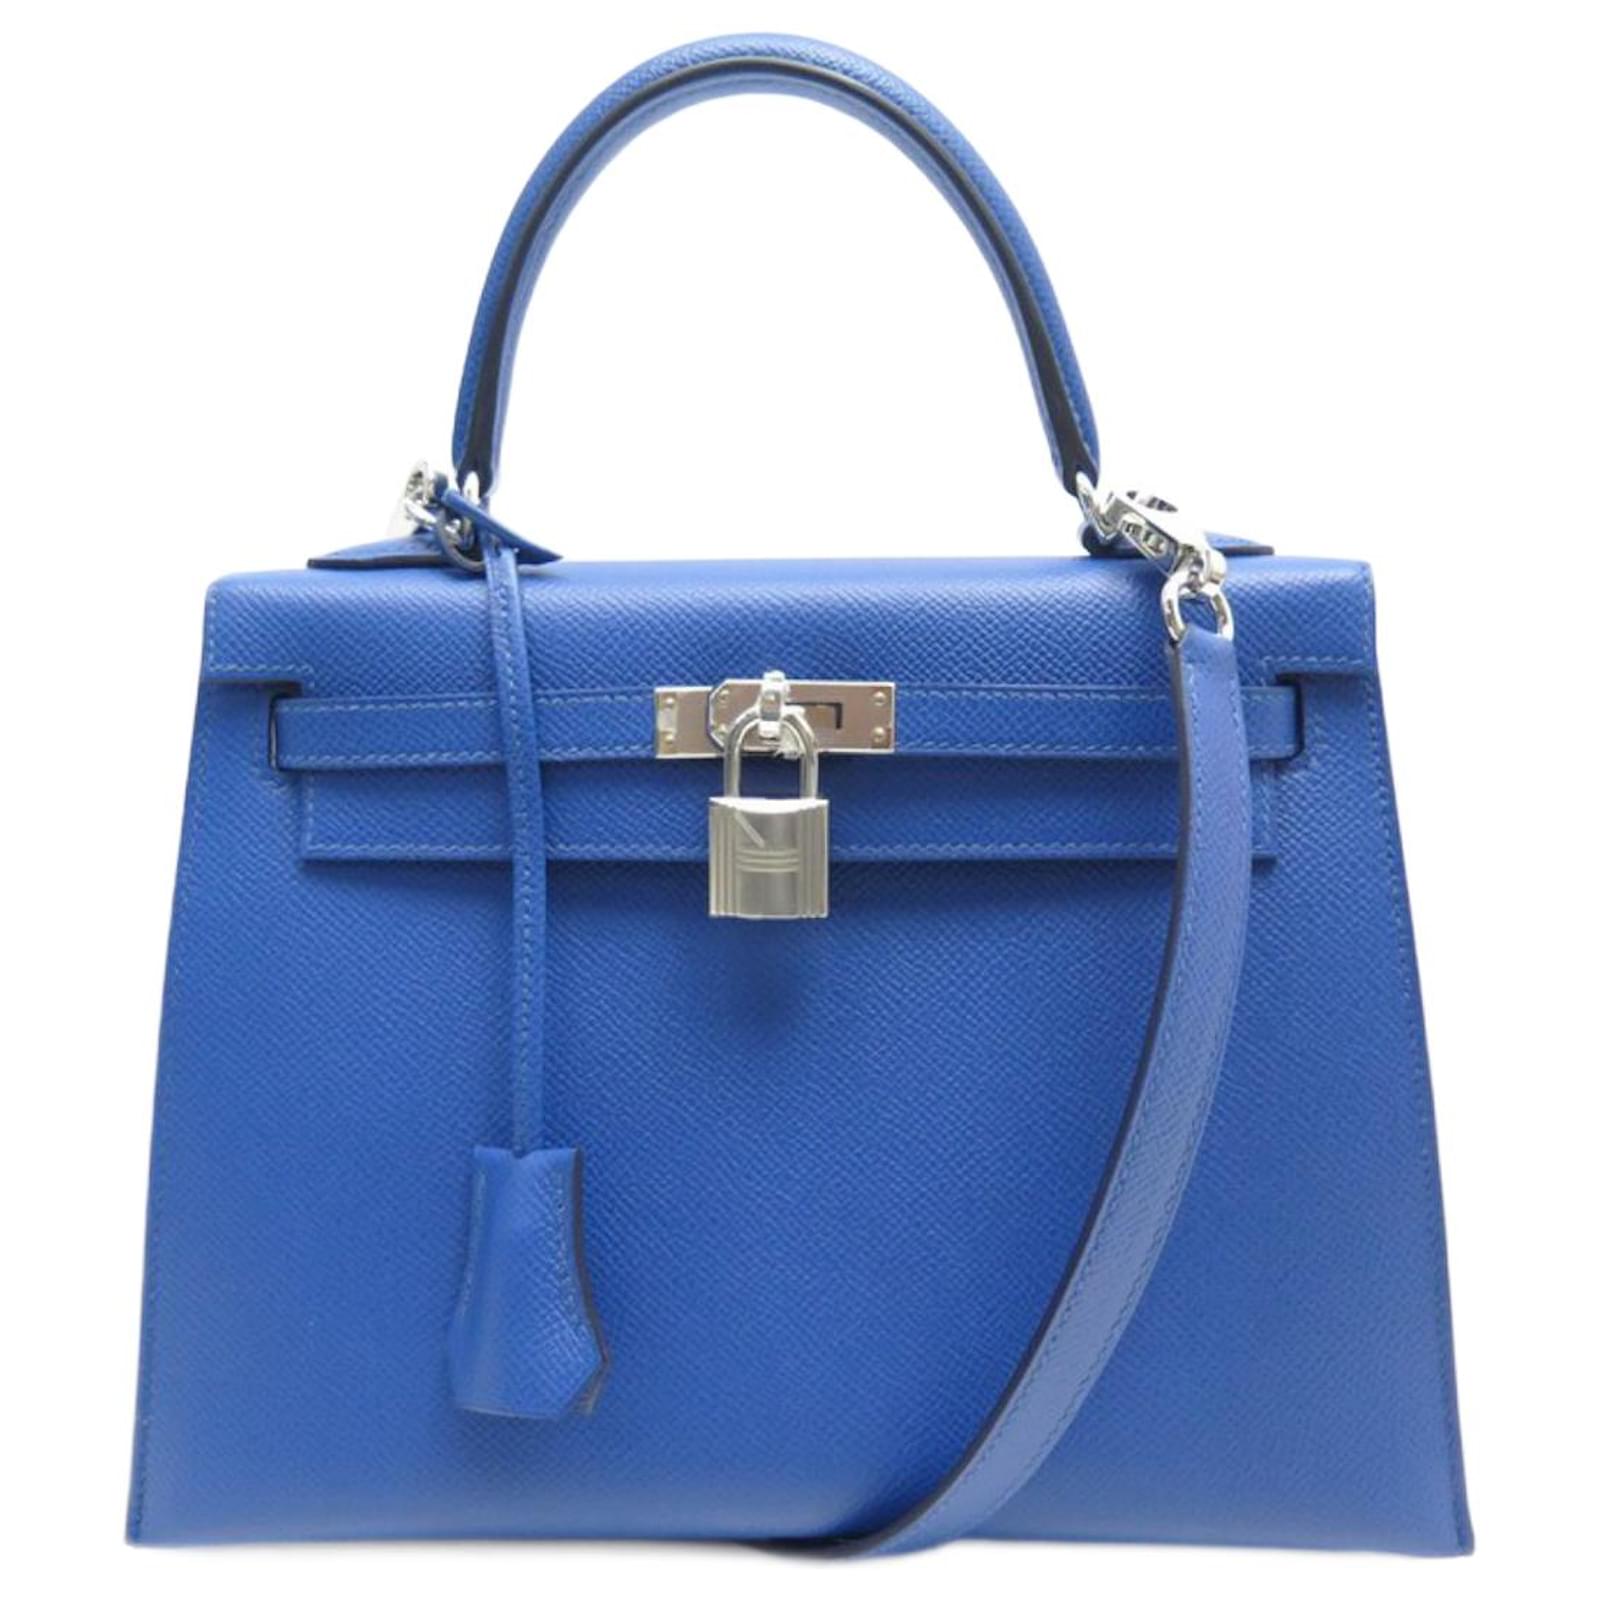 hermes kelly leather types